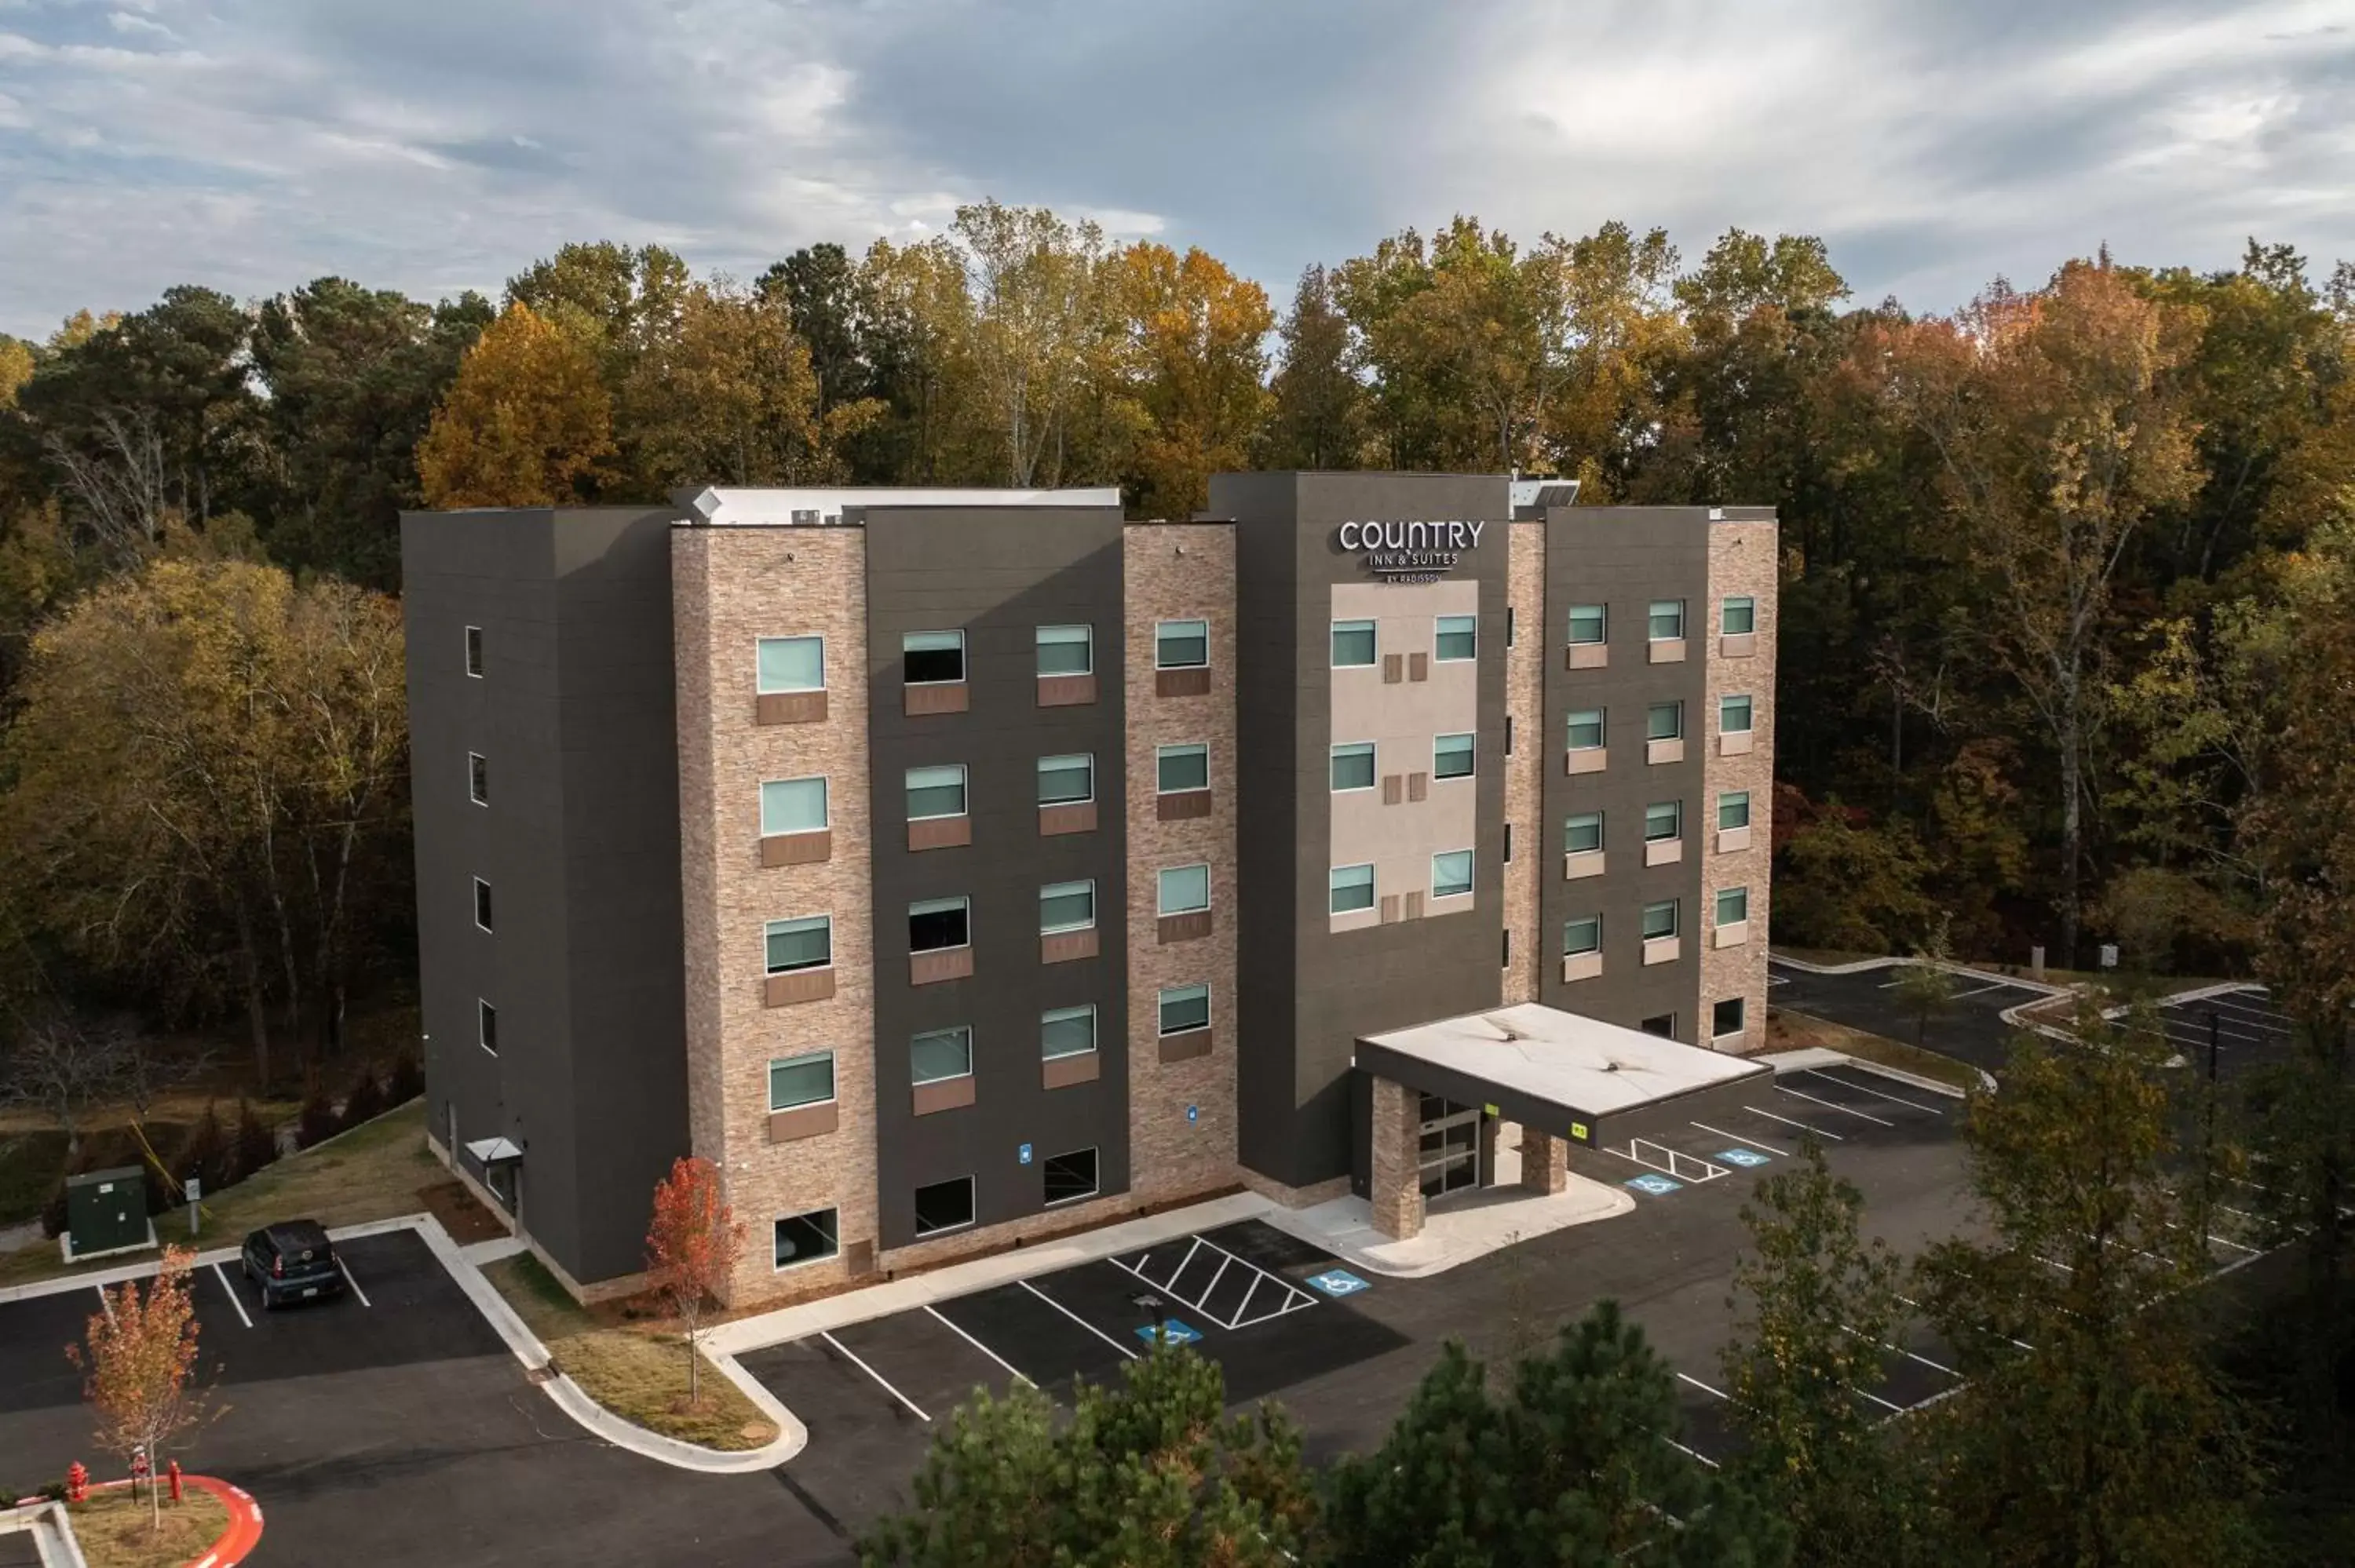 Property Building in Country Inn & Suites by Radisson, Cumming, GA